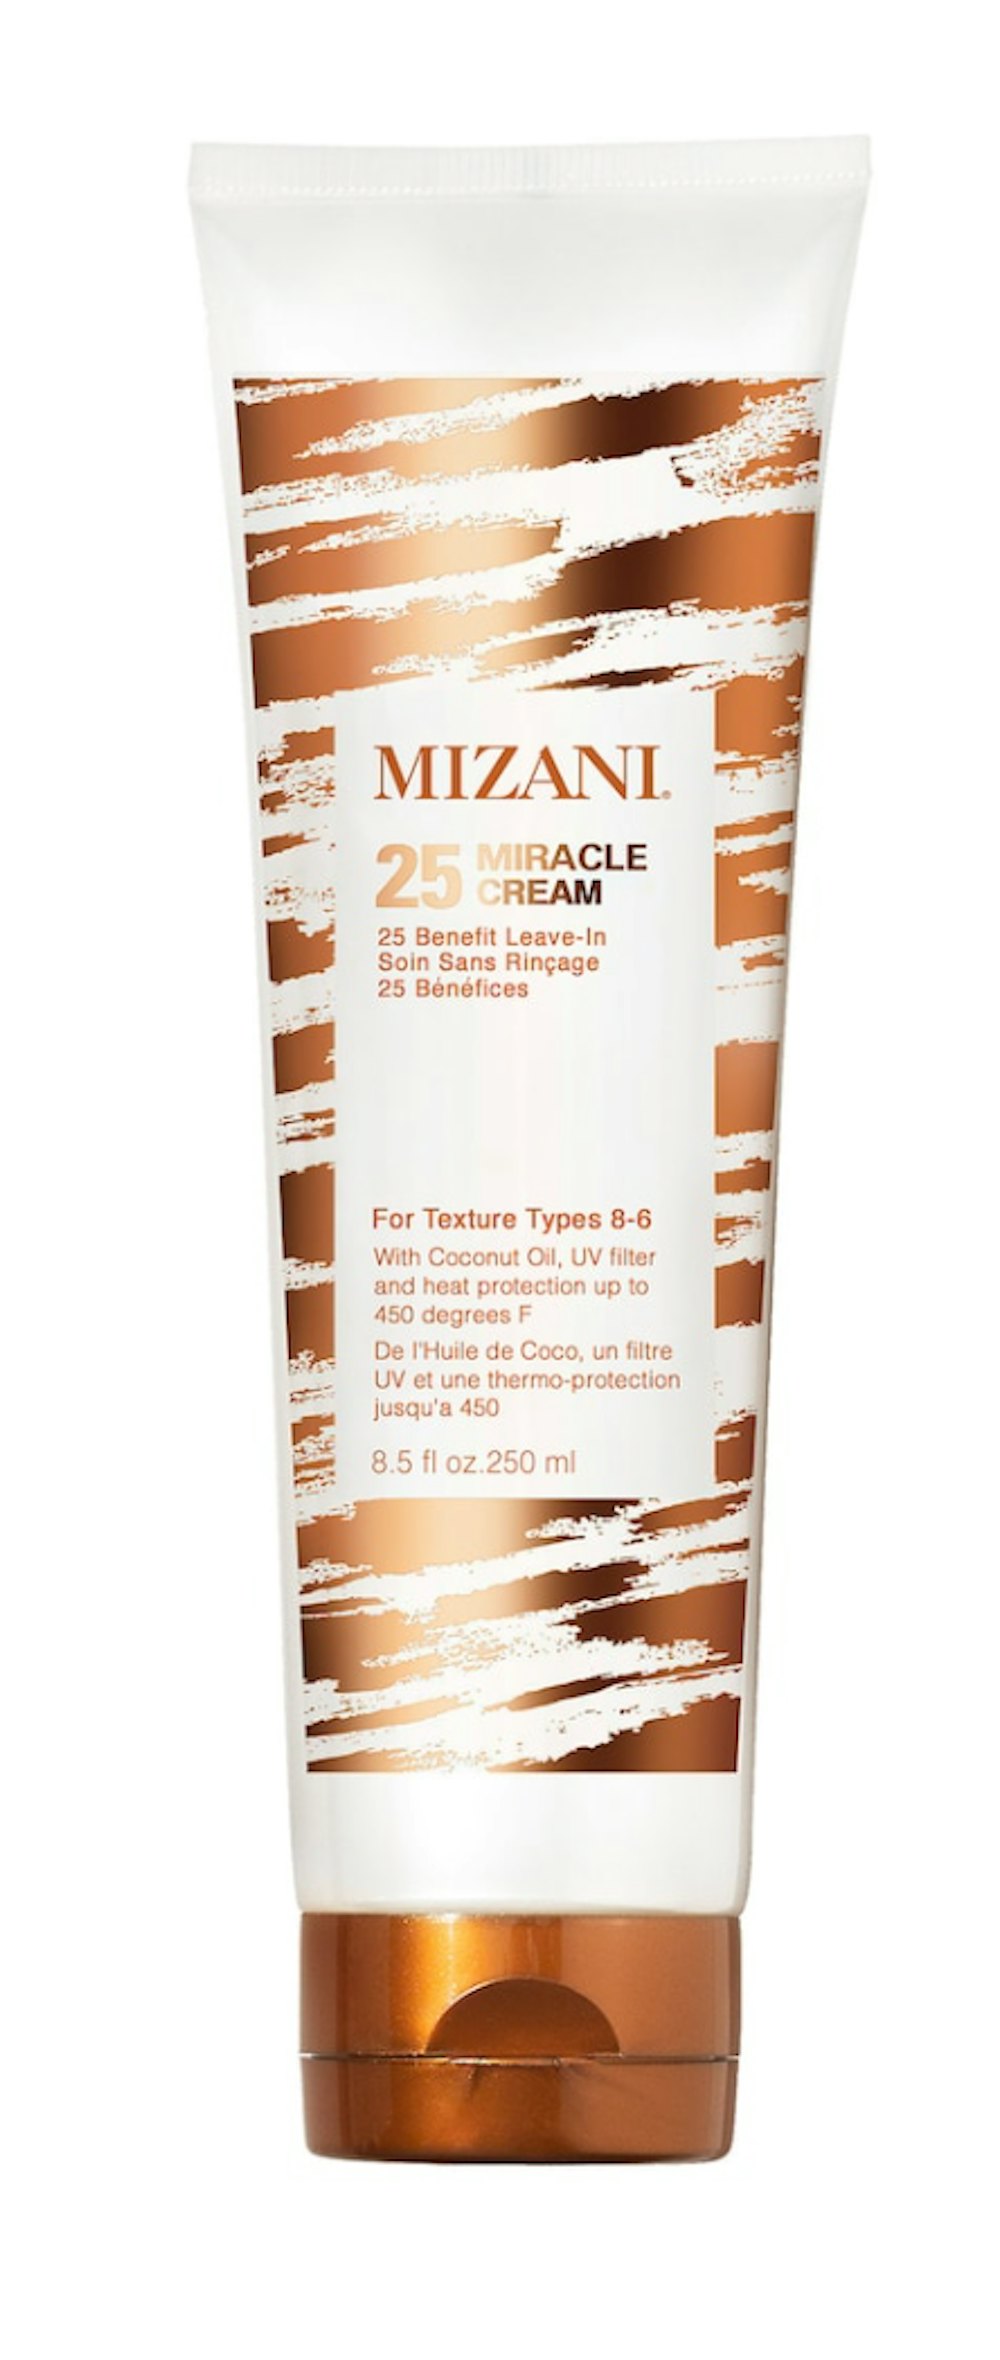 25 Miracle Leave-In Cream